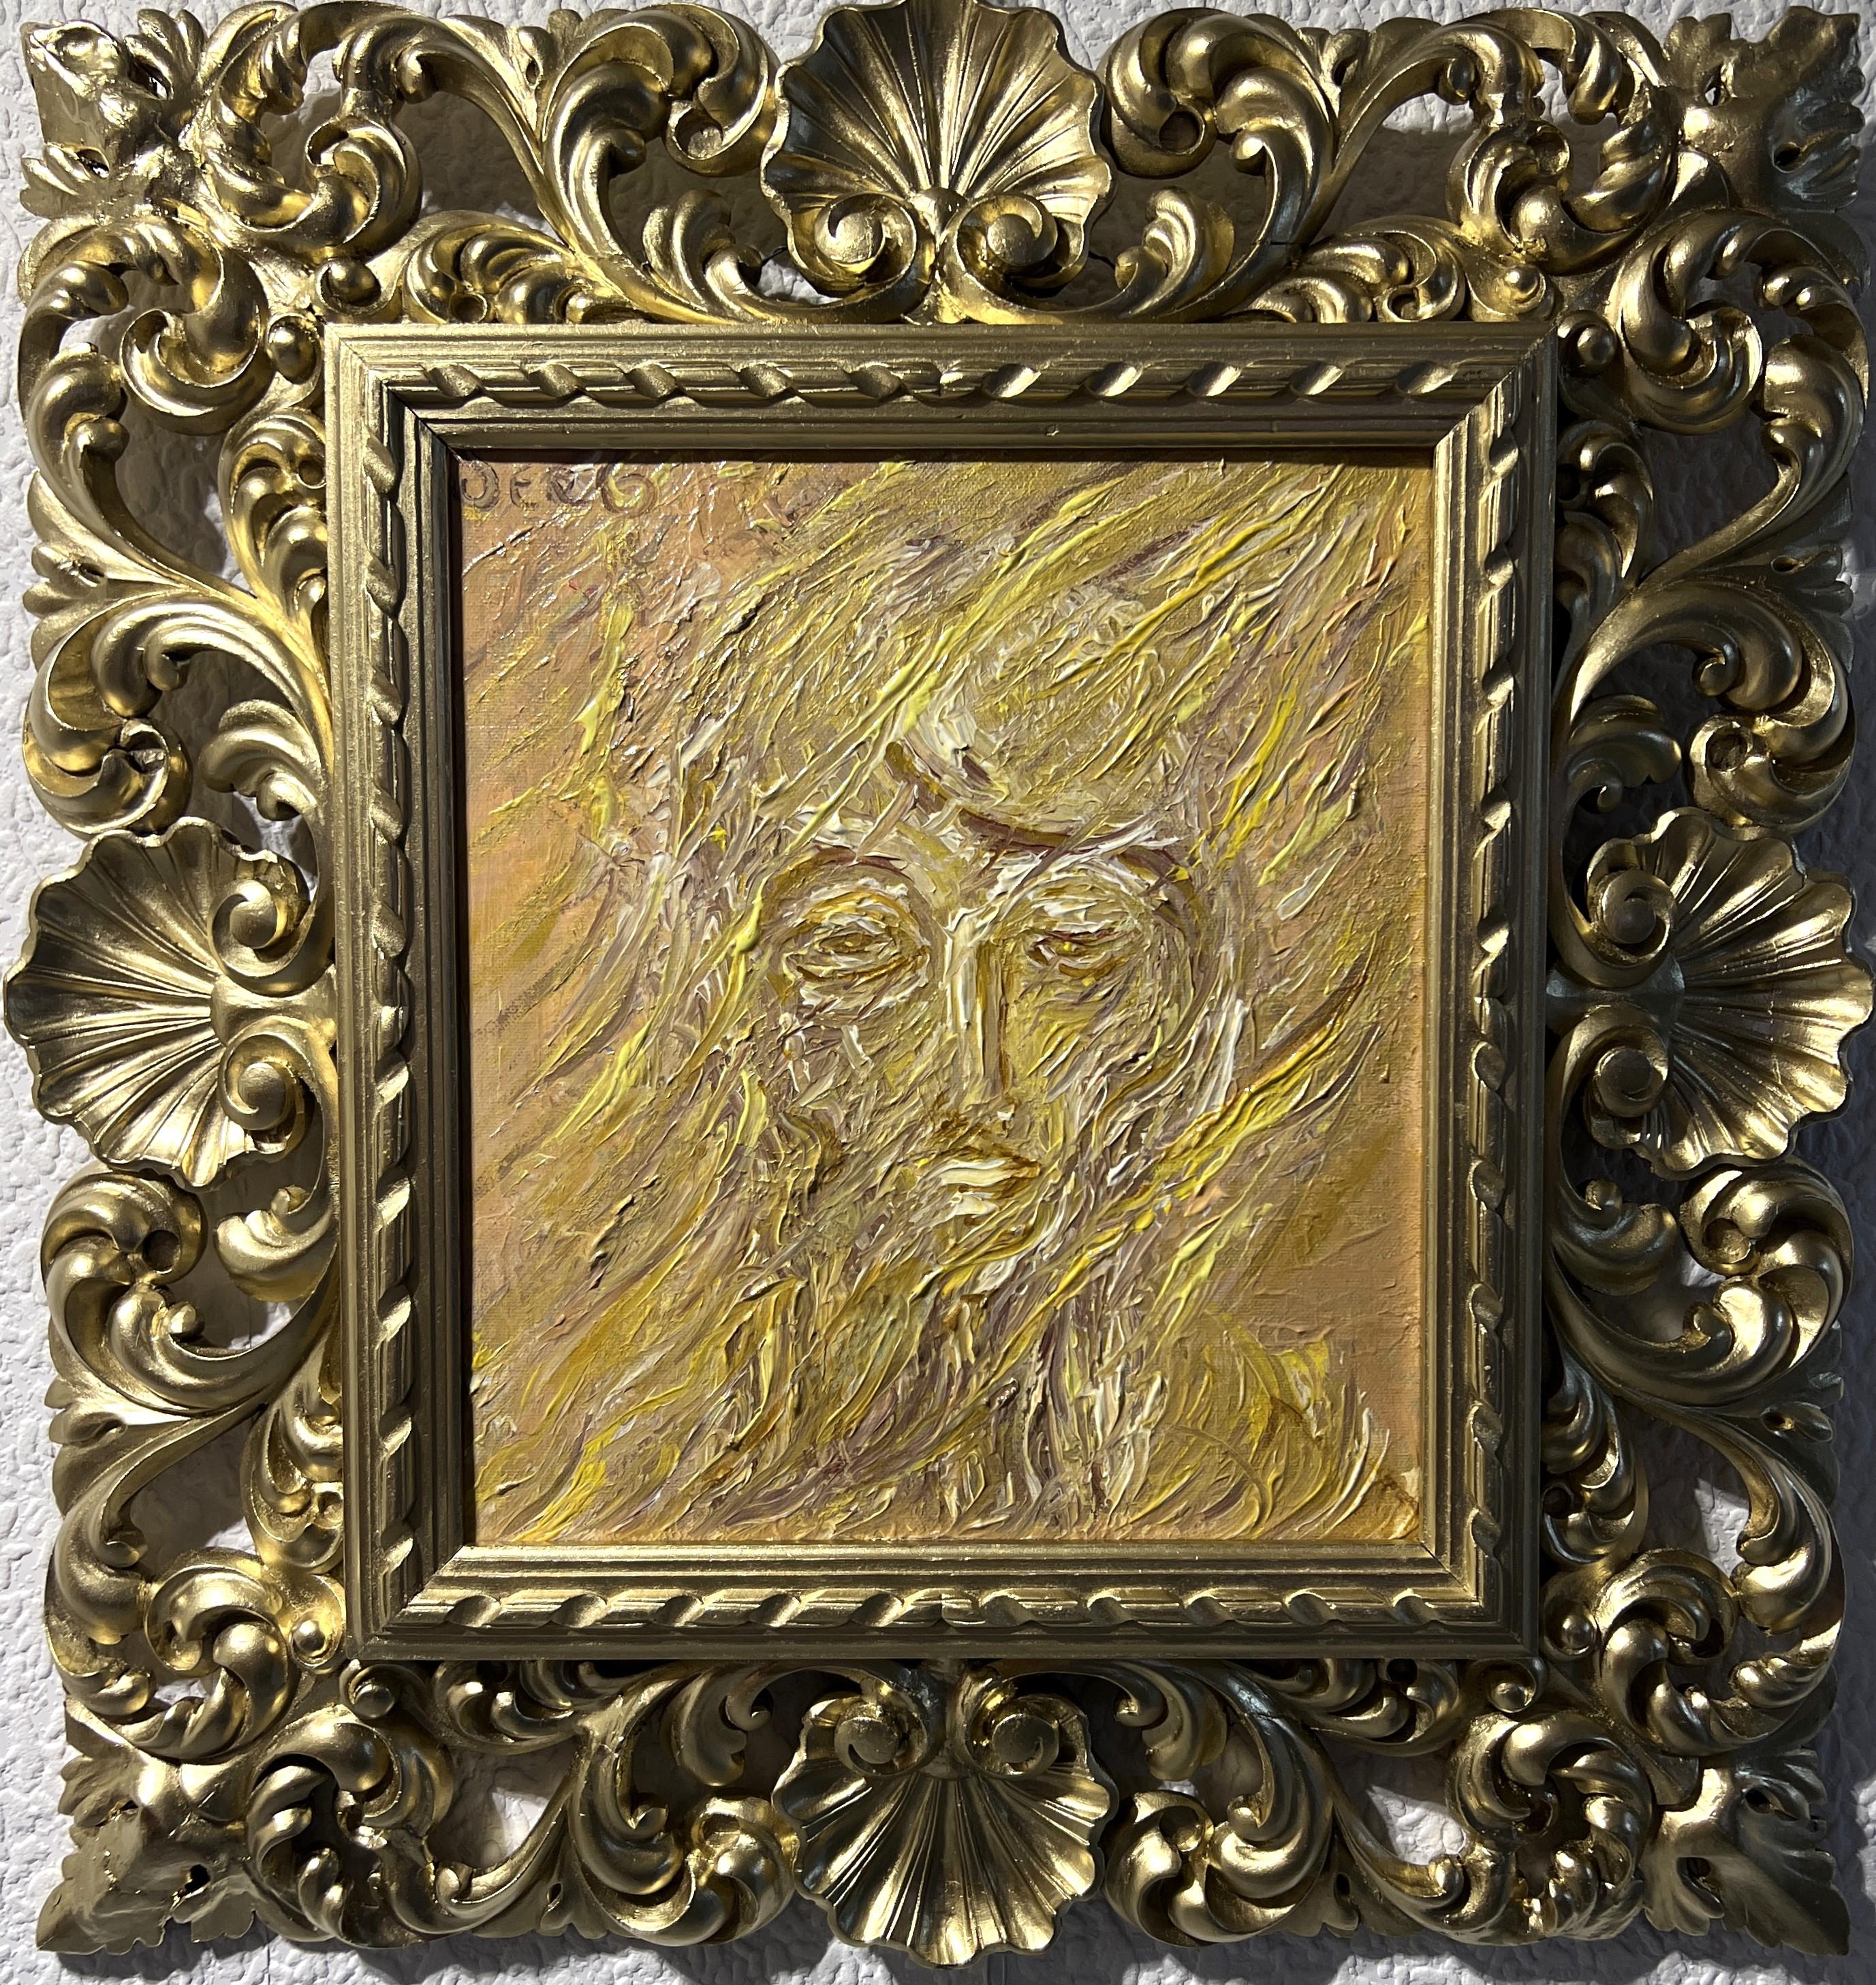 This is a unique original acrylic painting on canvas board in abstract style by Serg Graff, Portrait titled "Stranger". 

It comes signed, dated, and with a COA (Certificate of Authenticity). 

Presented in a gorgeous vintage ornate gold